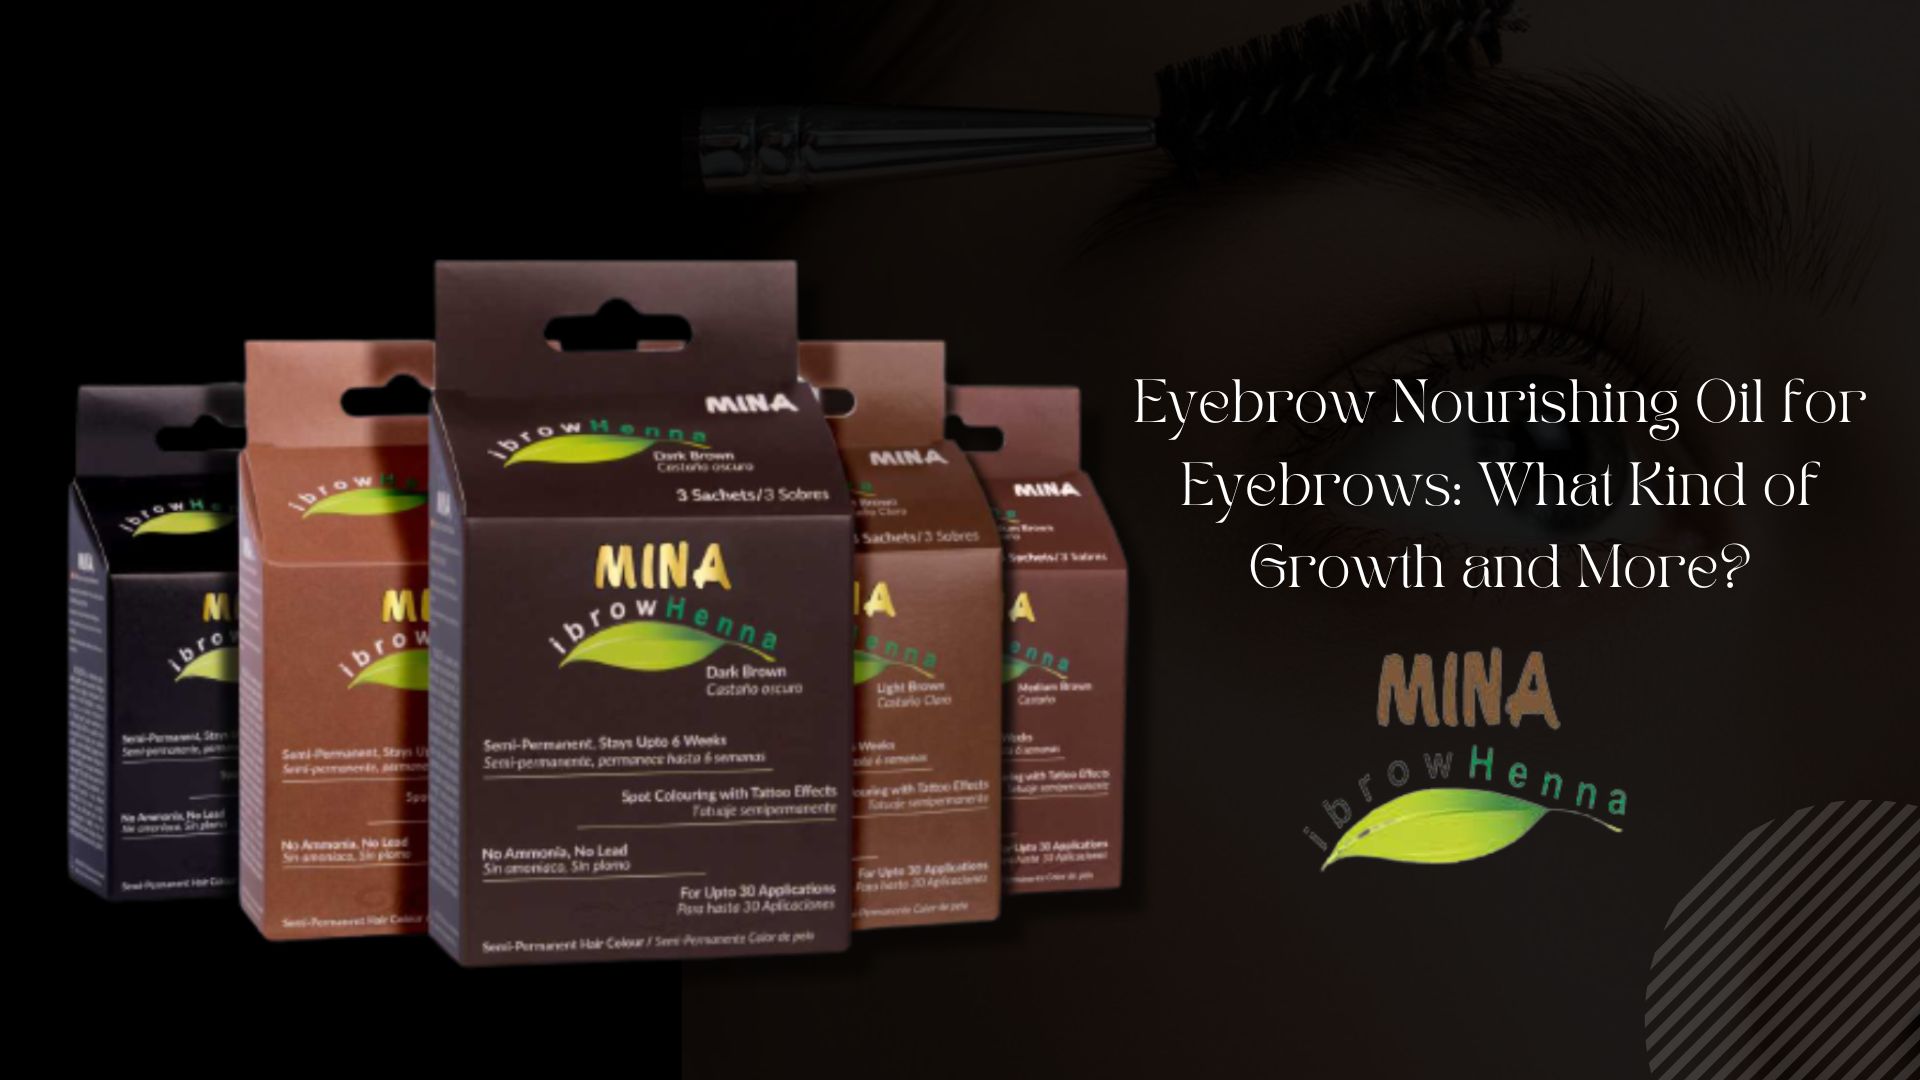 Eyebrow-Nourishing-Oil-for-Eyebrows-What-Kind-of-Growth-and-More